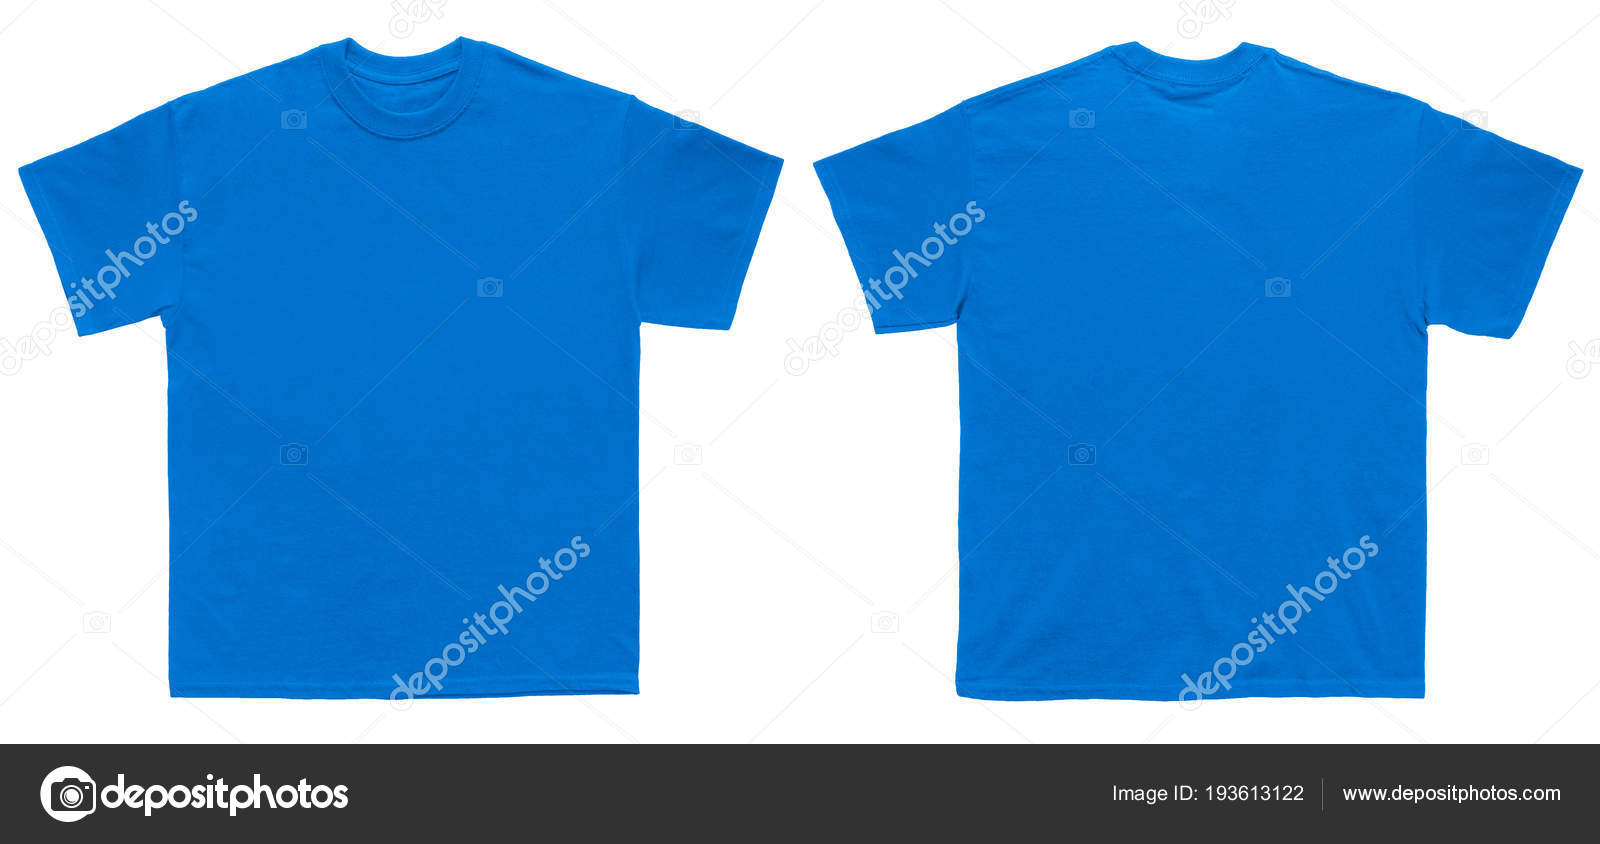 Download Images: royal blue t shirt template | Blank Shirt Color ...